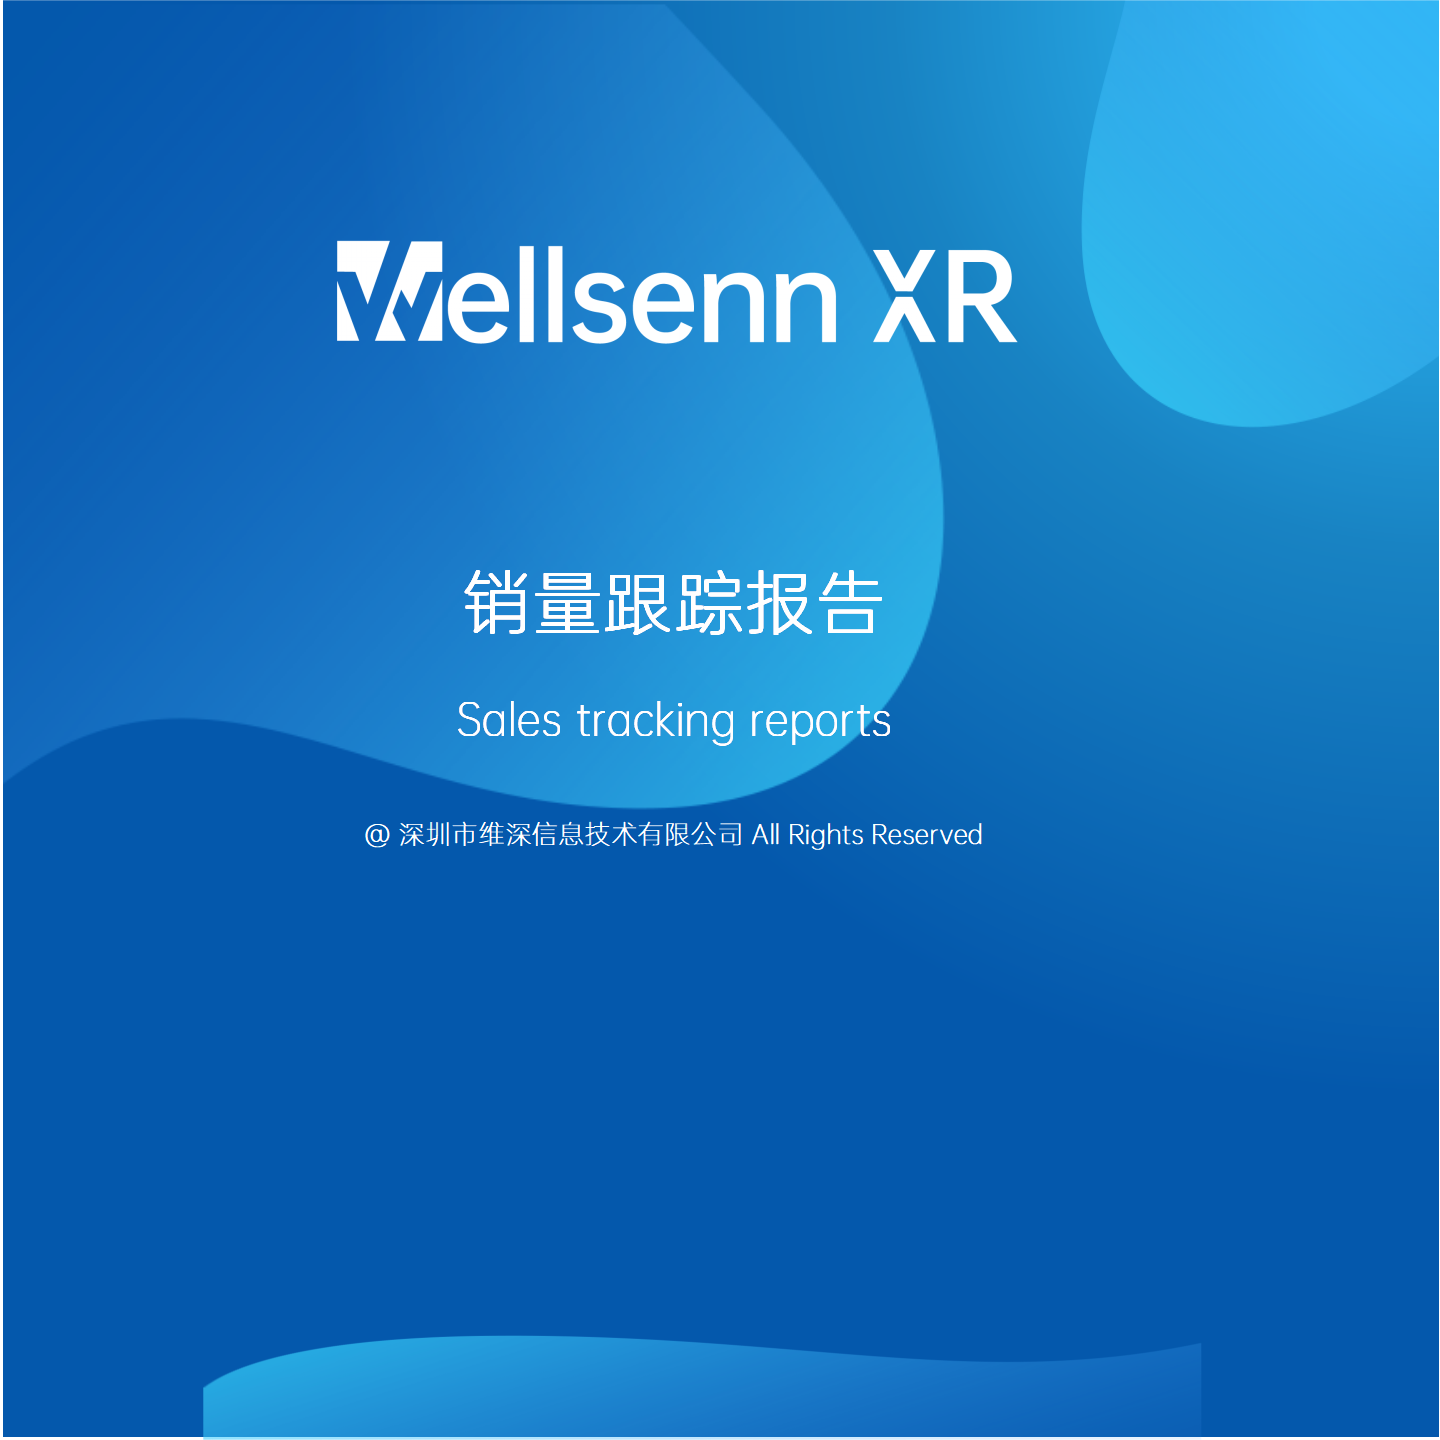 The sales tracking report is based on the sales volume of XR related products on a quarterly basis and is presented in the form of a report after analyst analysis